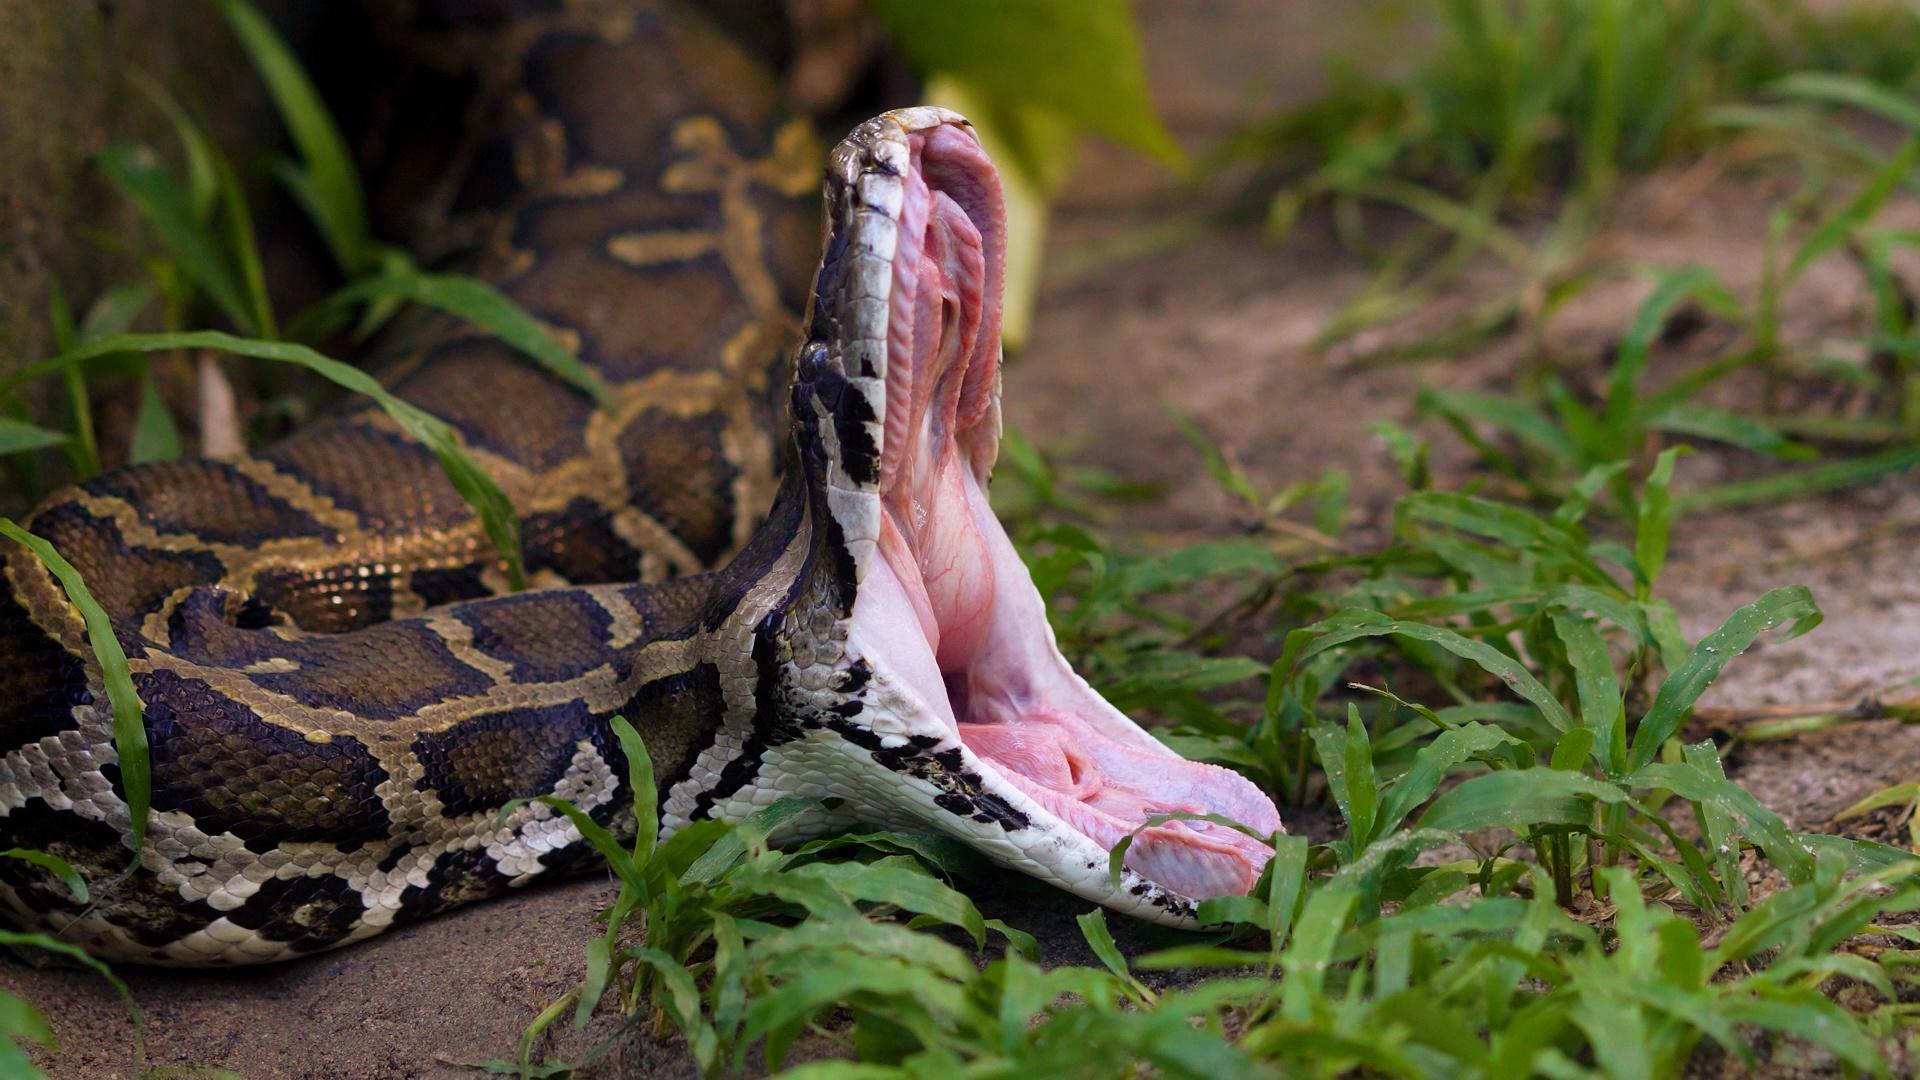 A python slithering through dirt and grass with its mouth wide open.